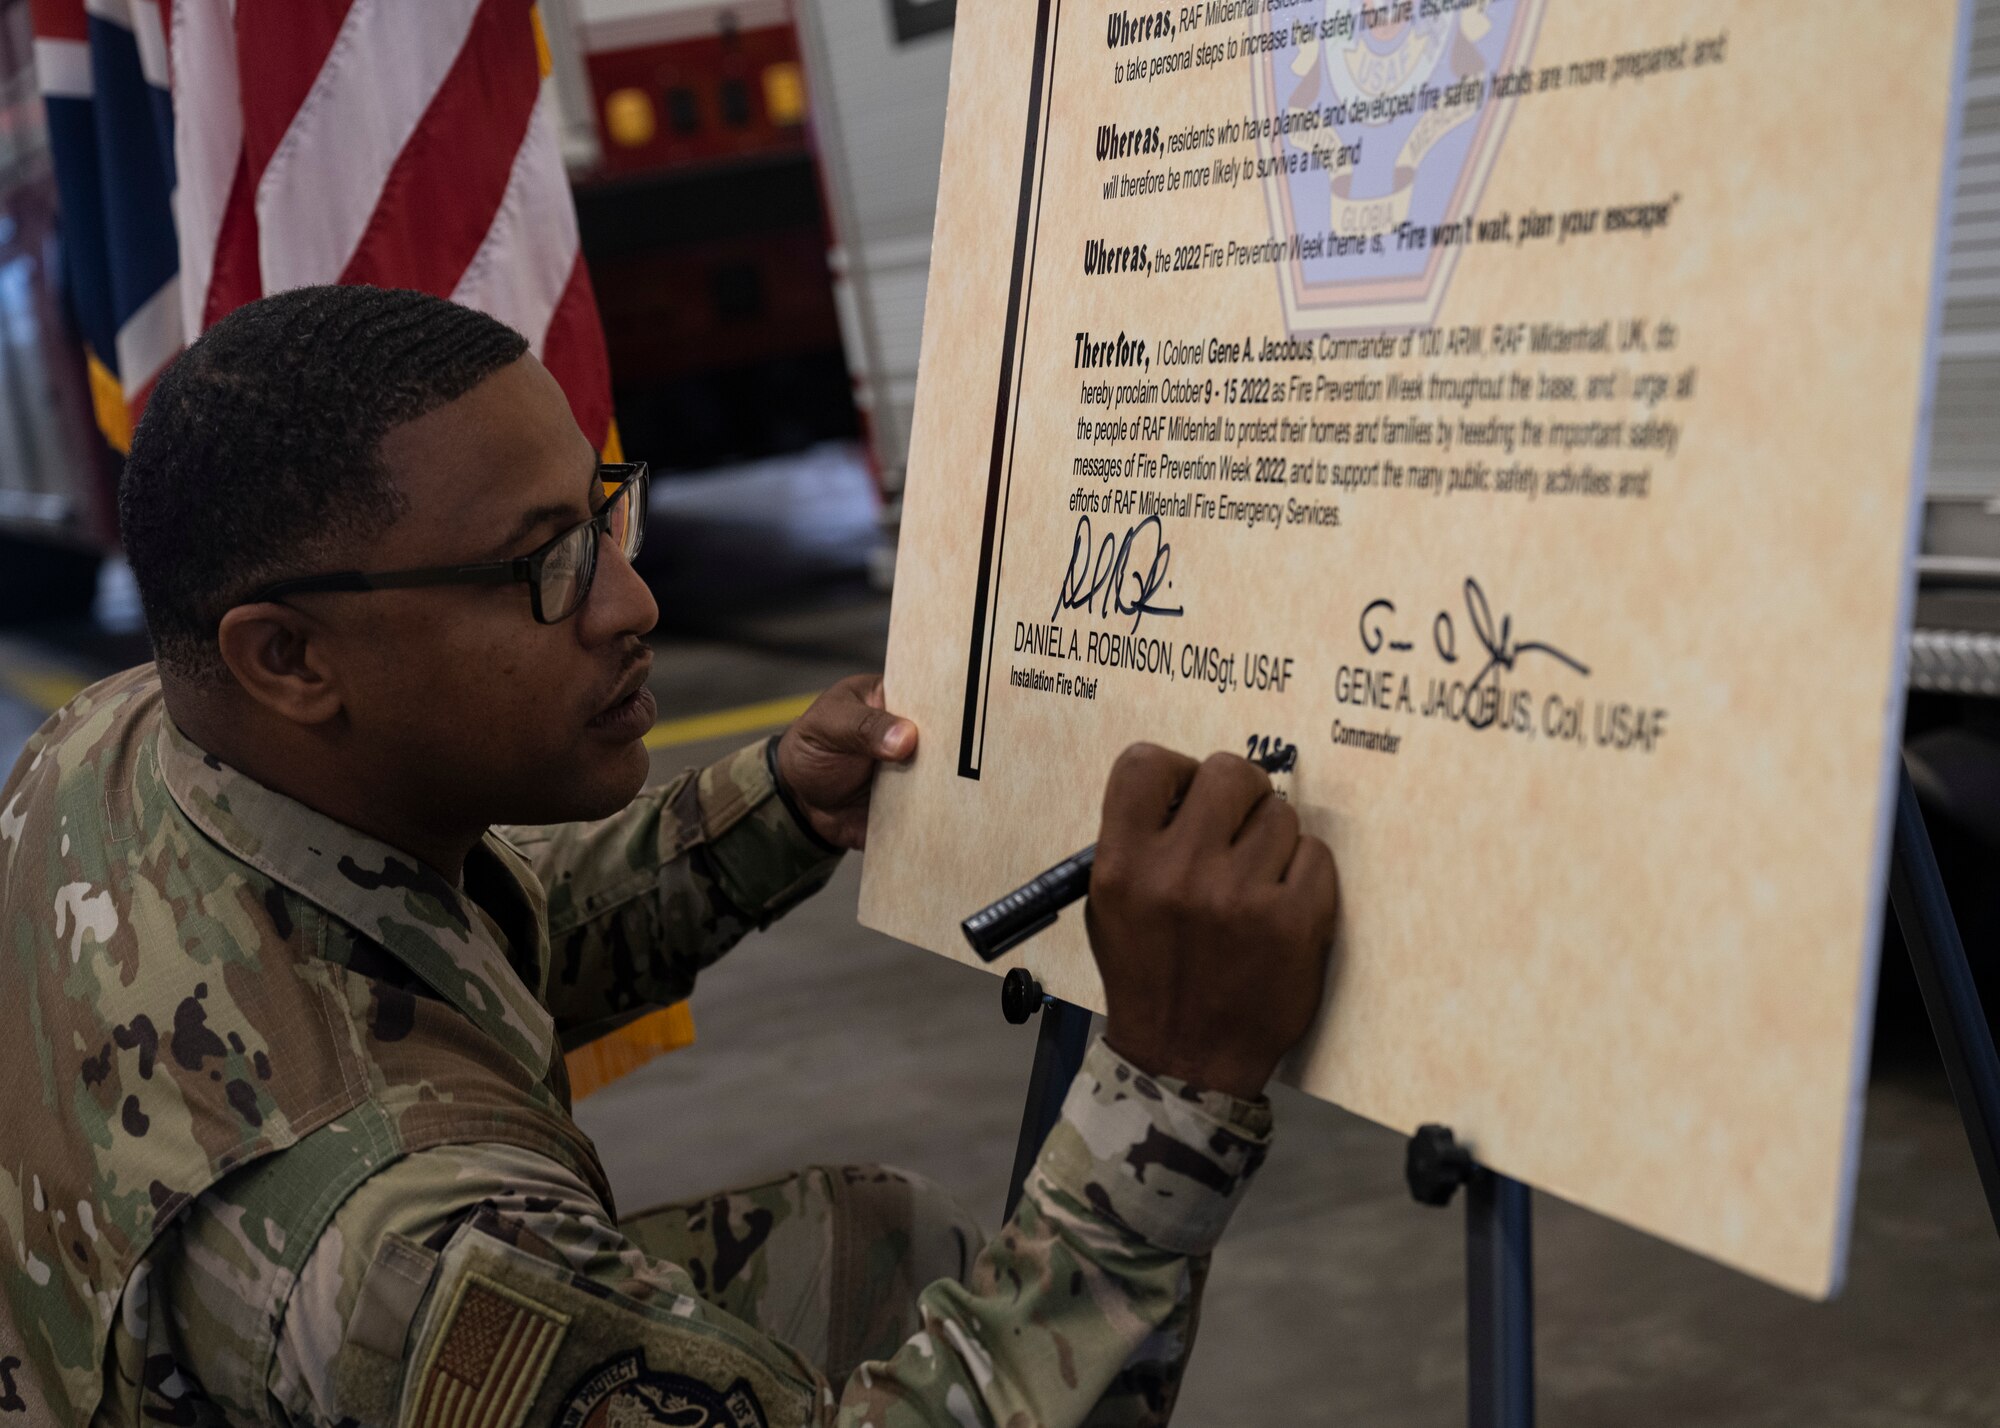 Fire prevention week is designed to educate Airmen and family members on proper fire safety procedures.